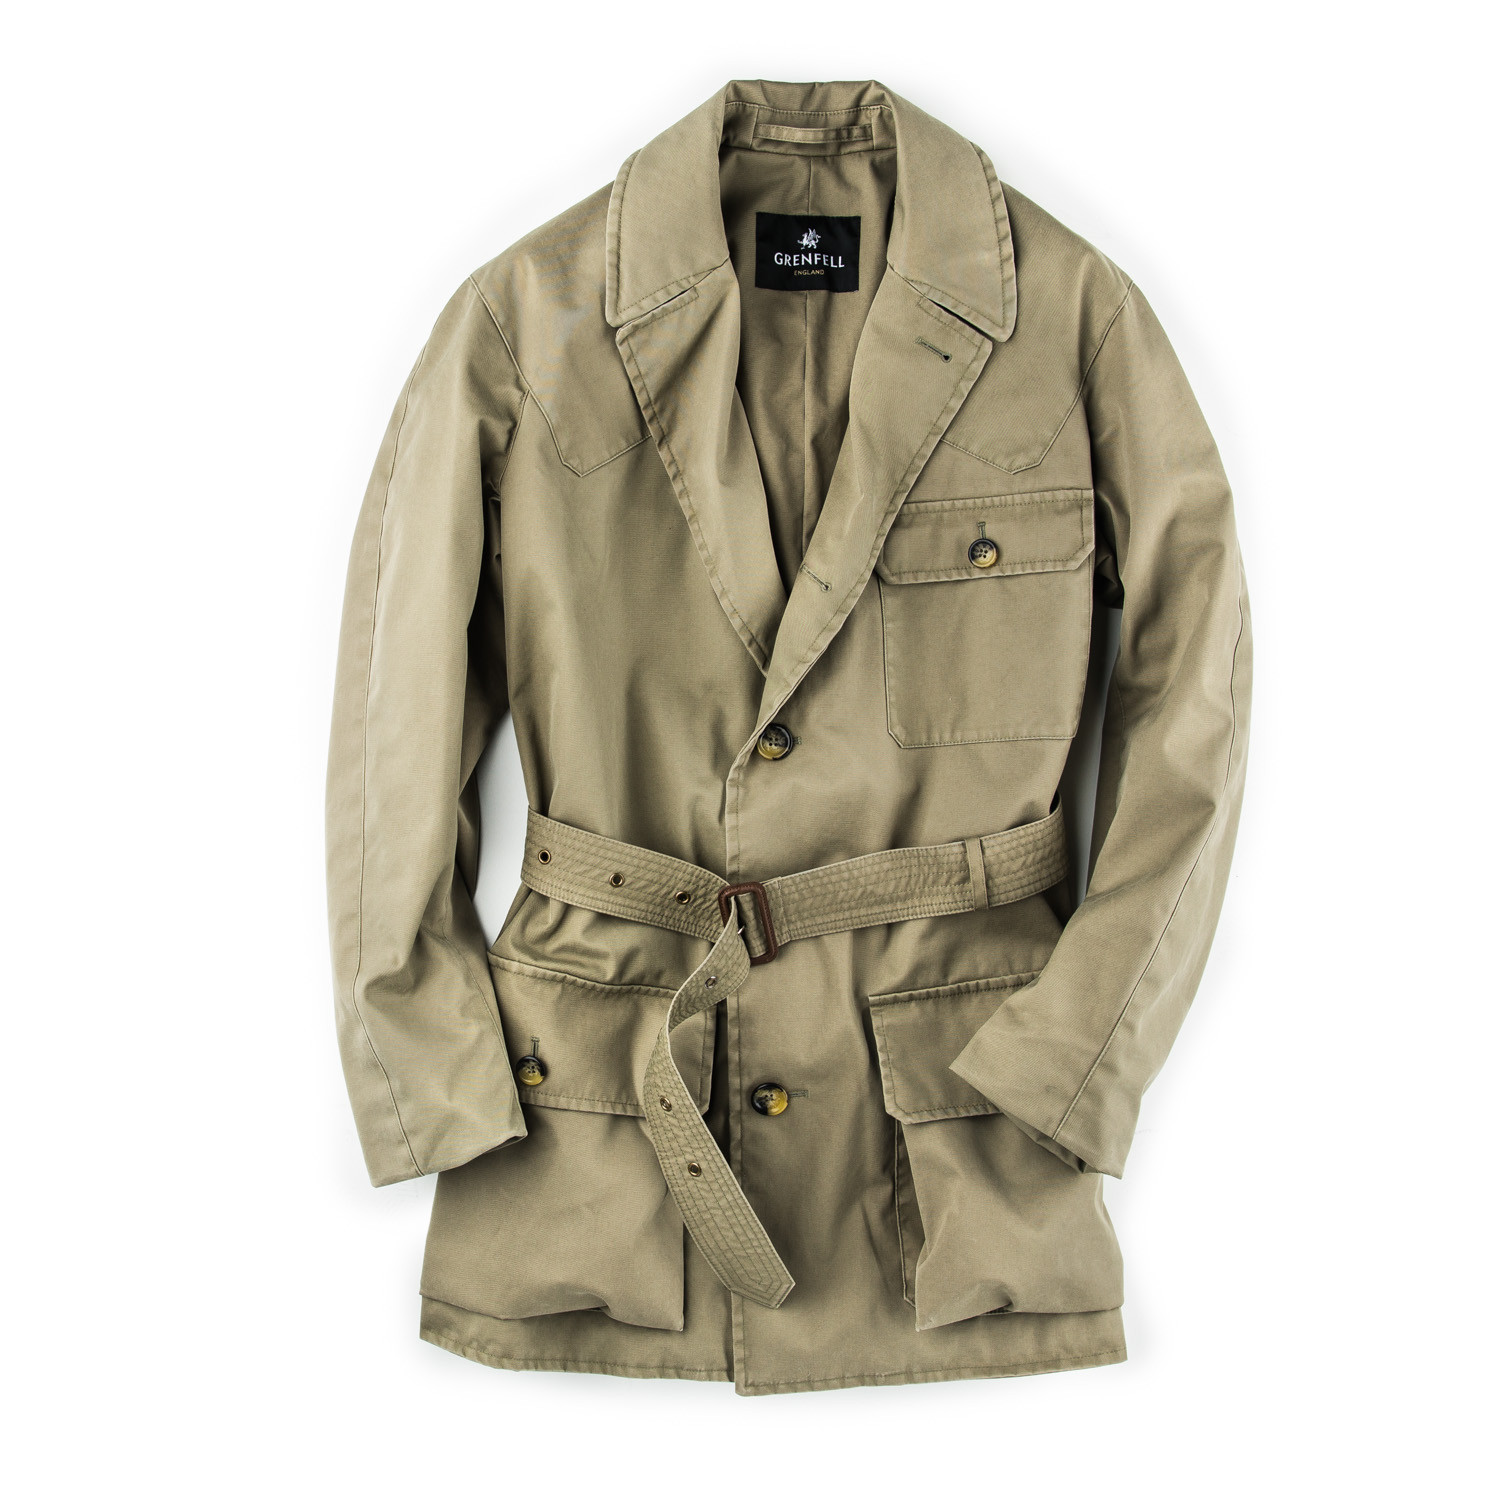 Grenfell - The Shooter Jacket - Sand